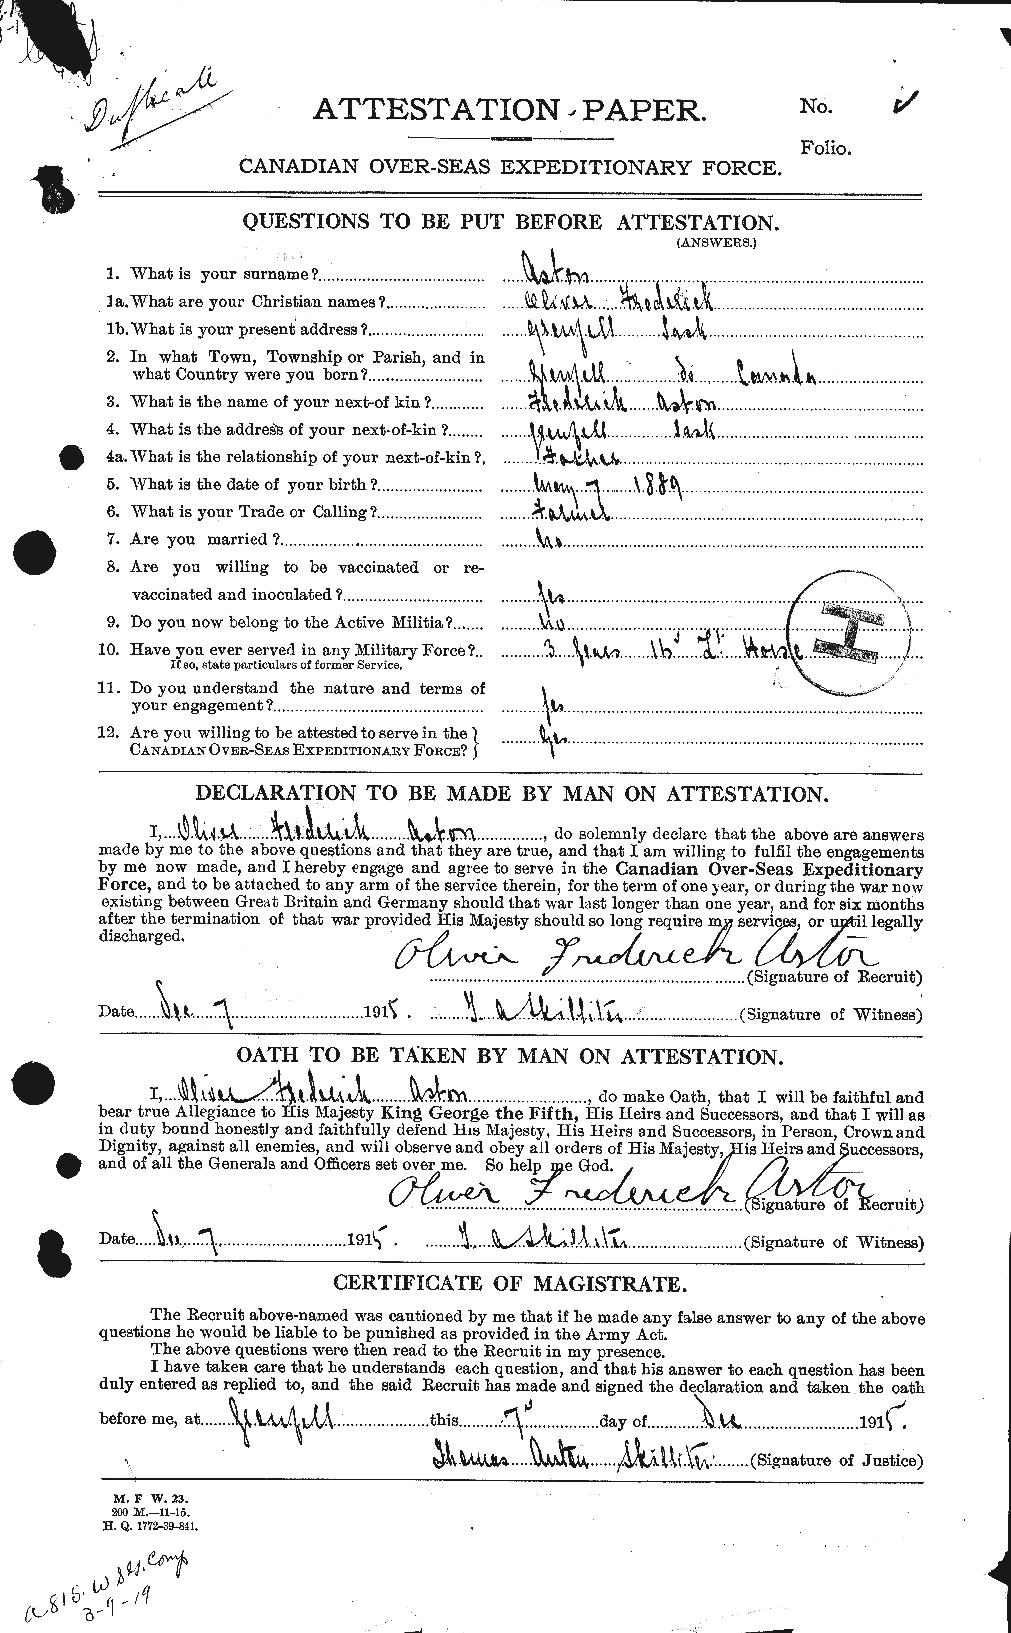 Personnel Records of the First World War - CEF 217092a